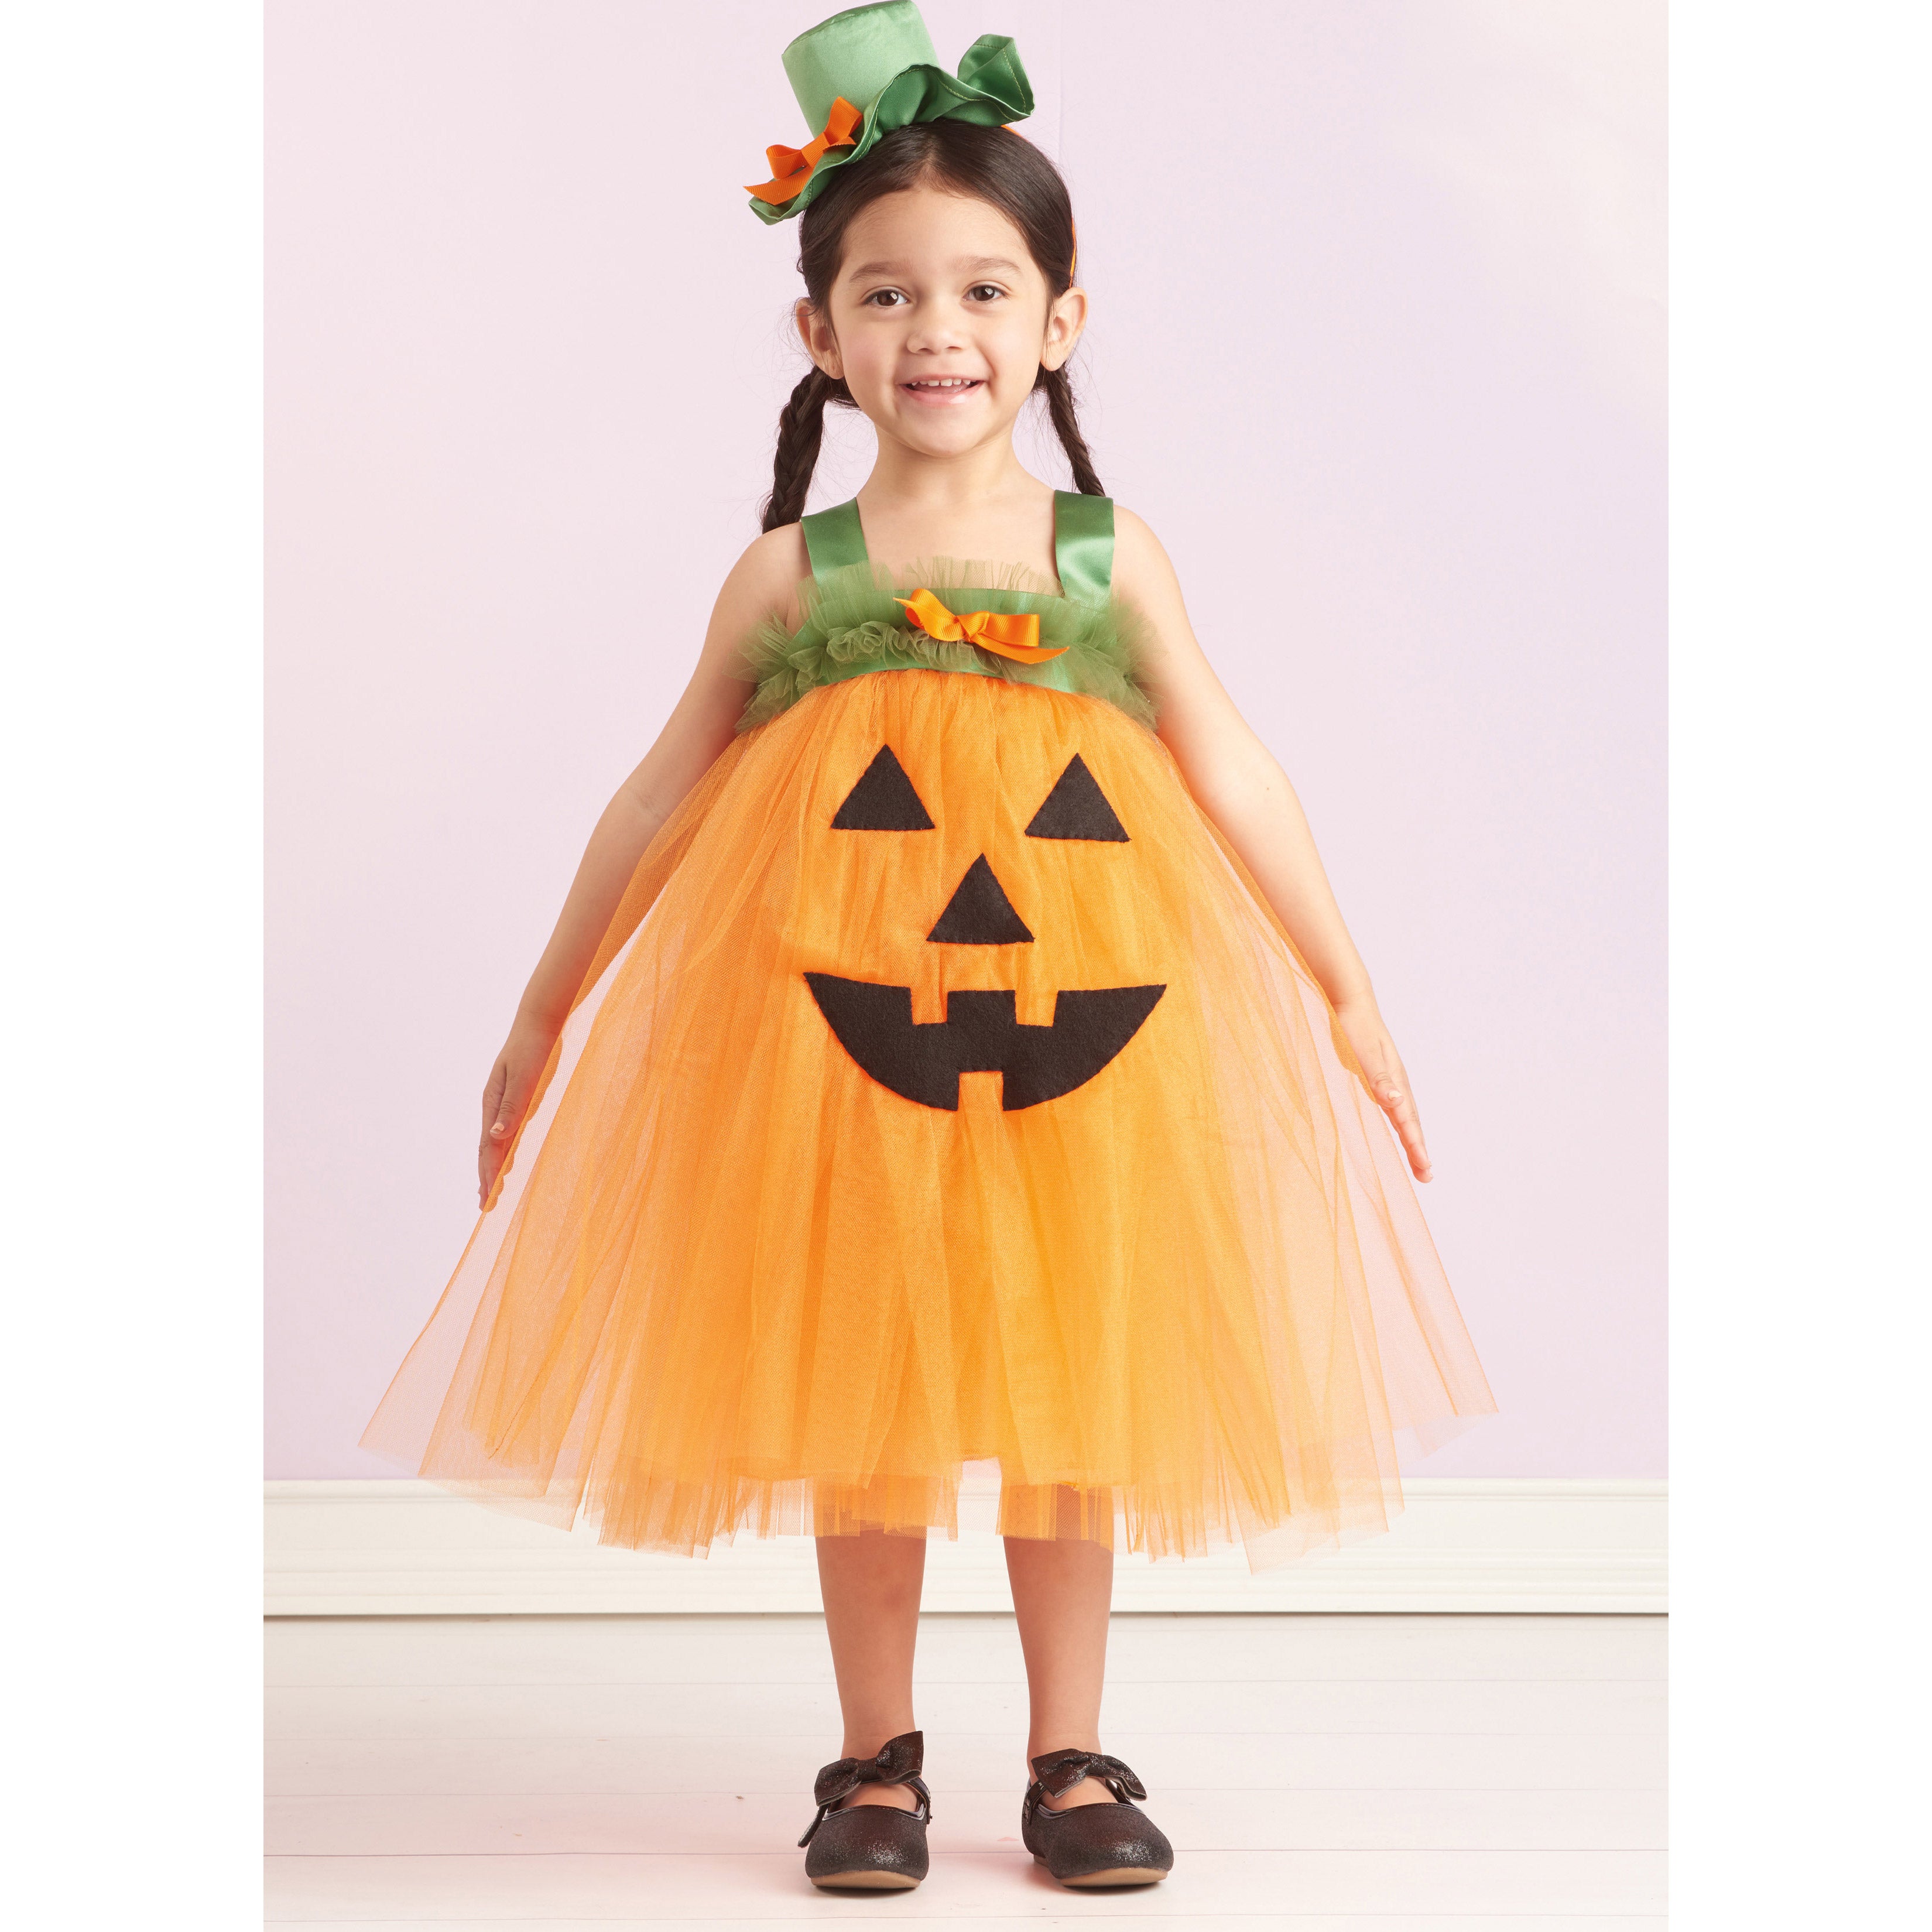 Simplicity9625 Toddlers' Halloween Costumes Pattern by Andrea Schewe Designs from Jaycotts Sewing Supplies